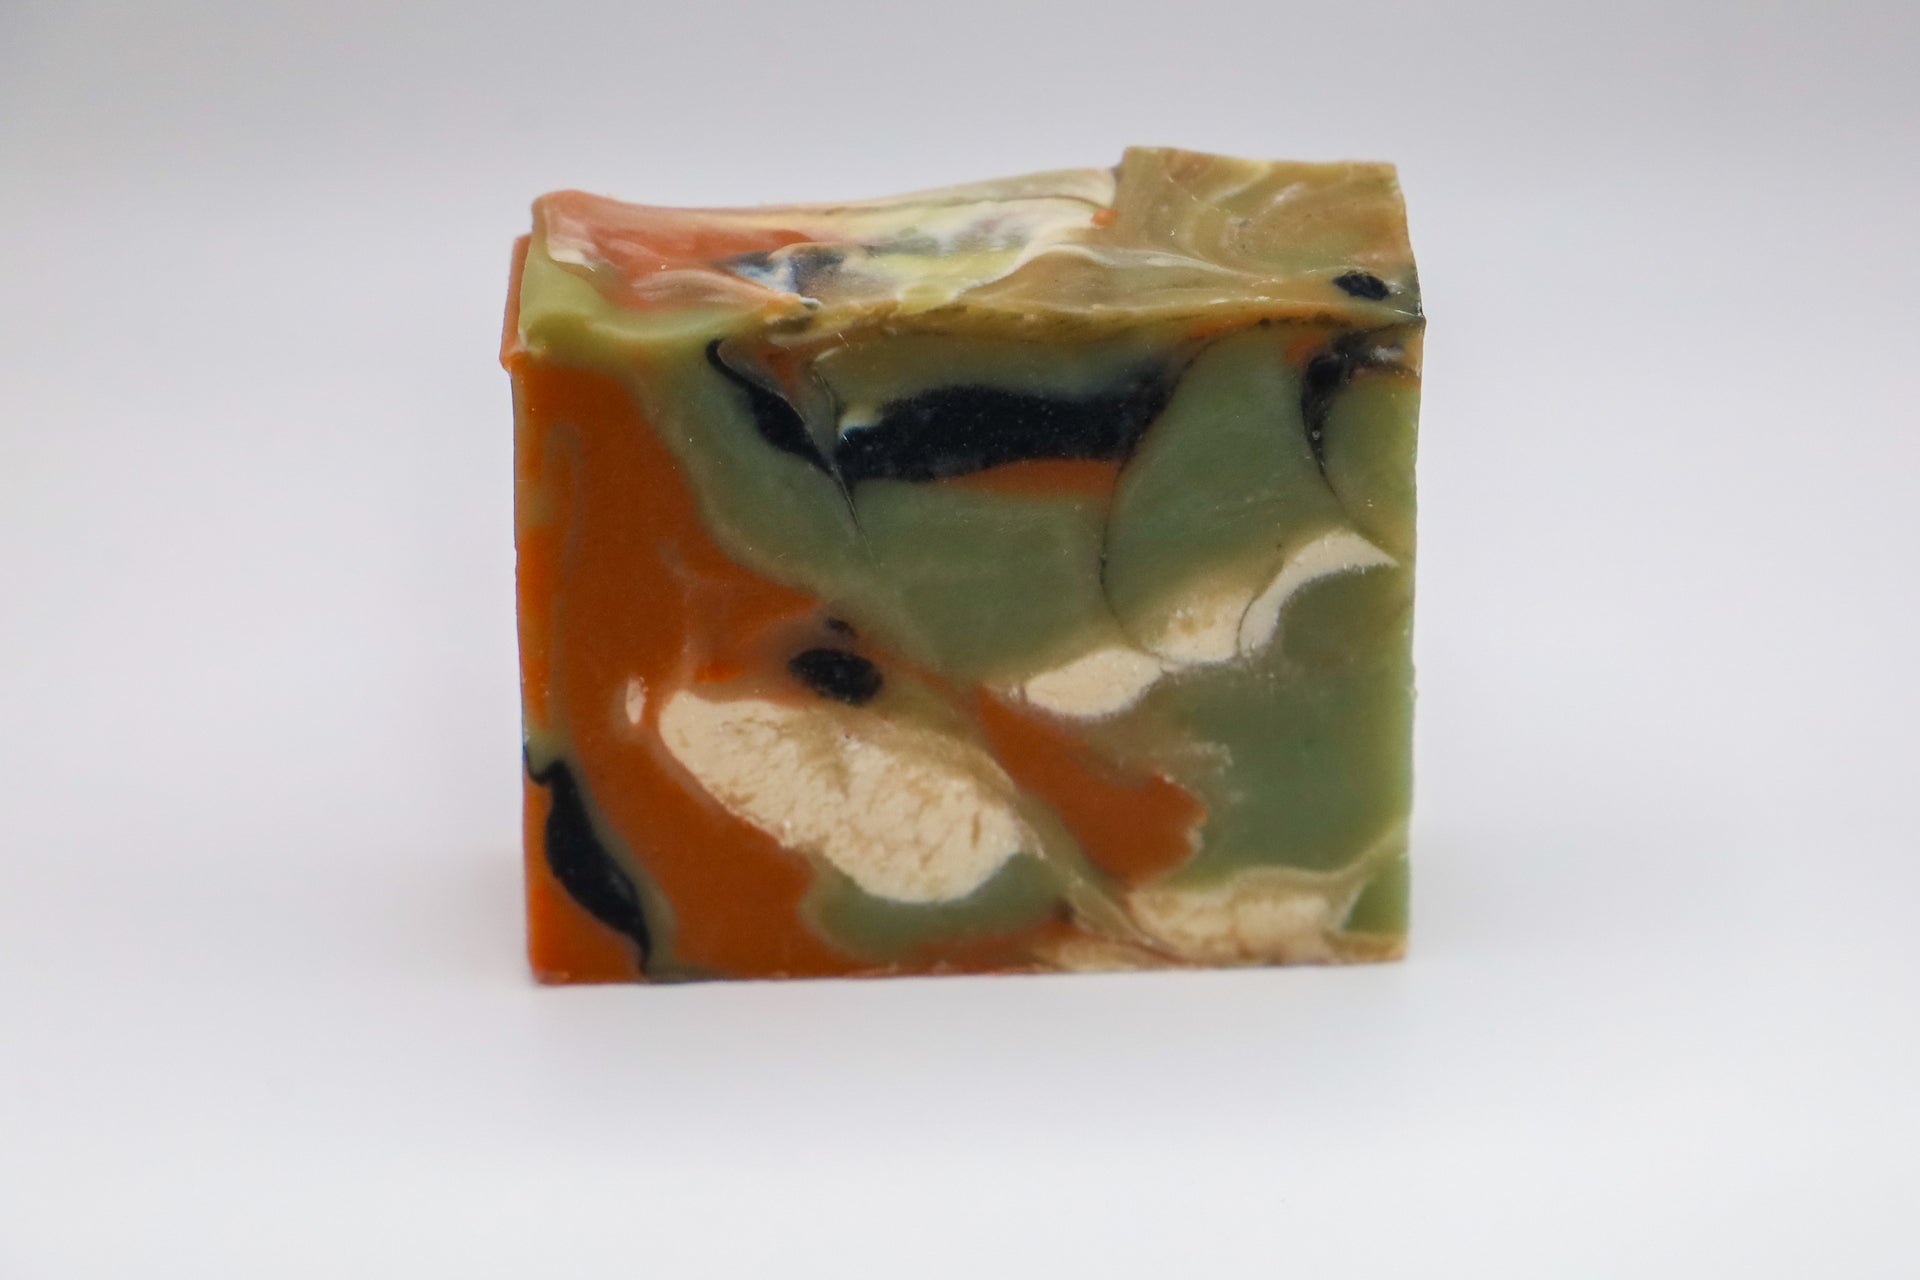 Handmade soap with green, orange, black and white swirls resembling onyx, scented with matcha and apricot